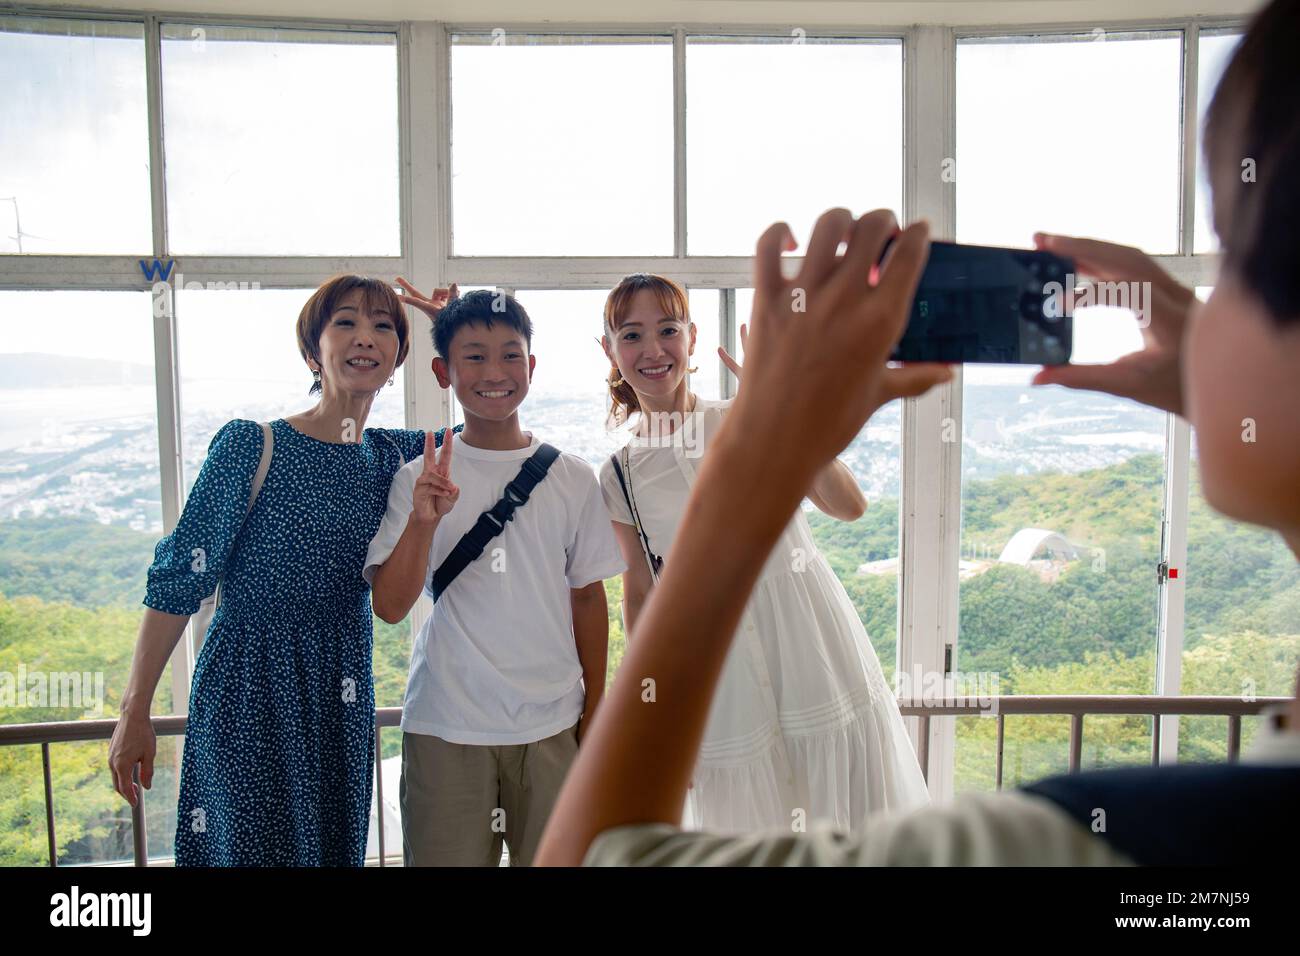 A boy using his mobile phone to take a picture of three people, a 13 year old boy, his mother and a friend. Stock Photo